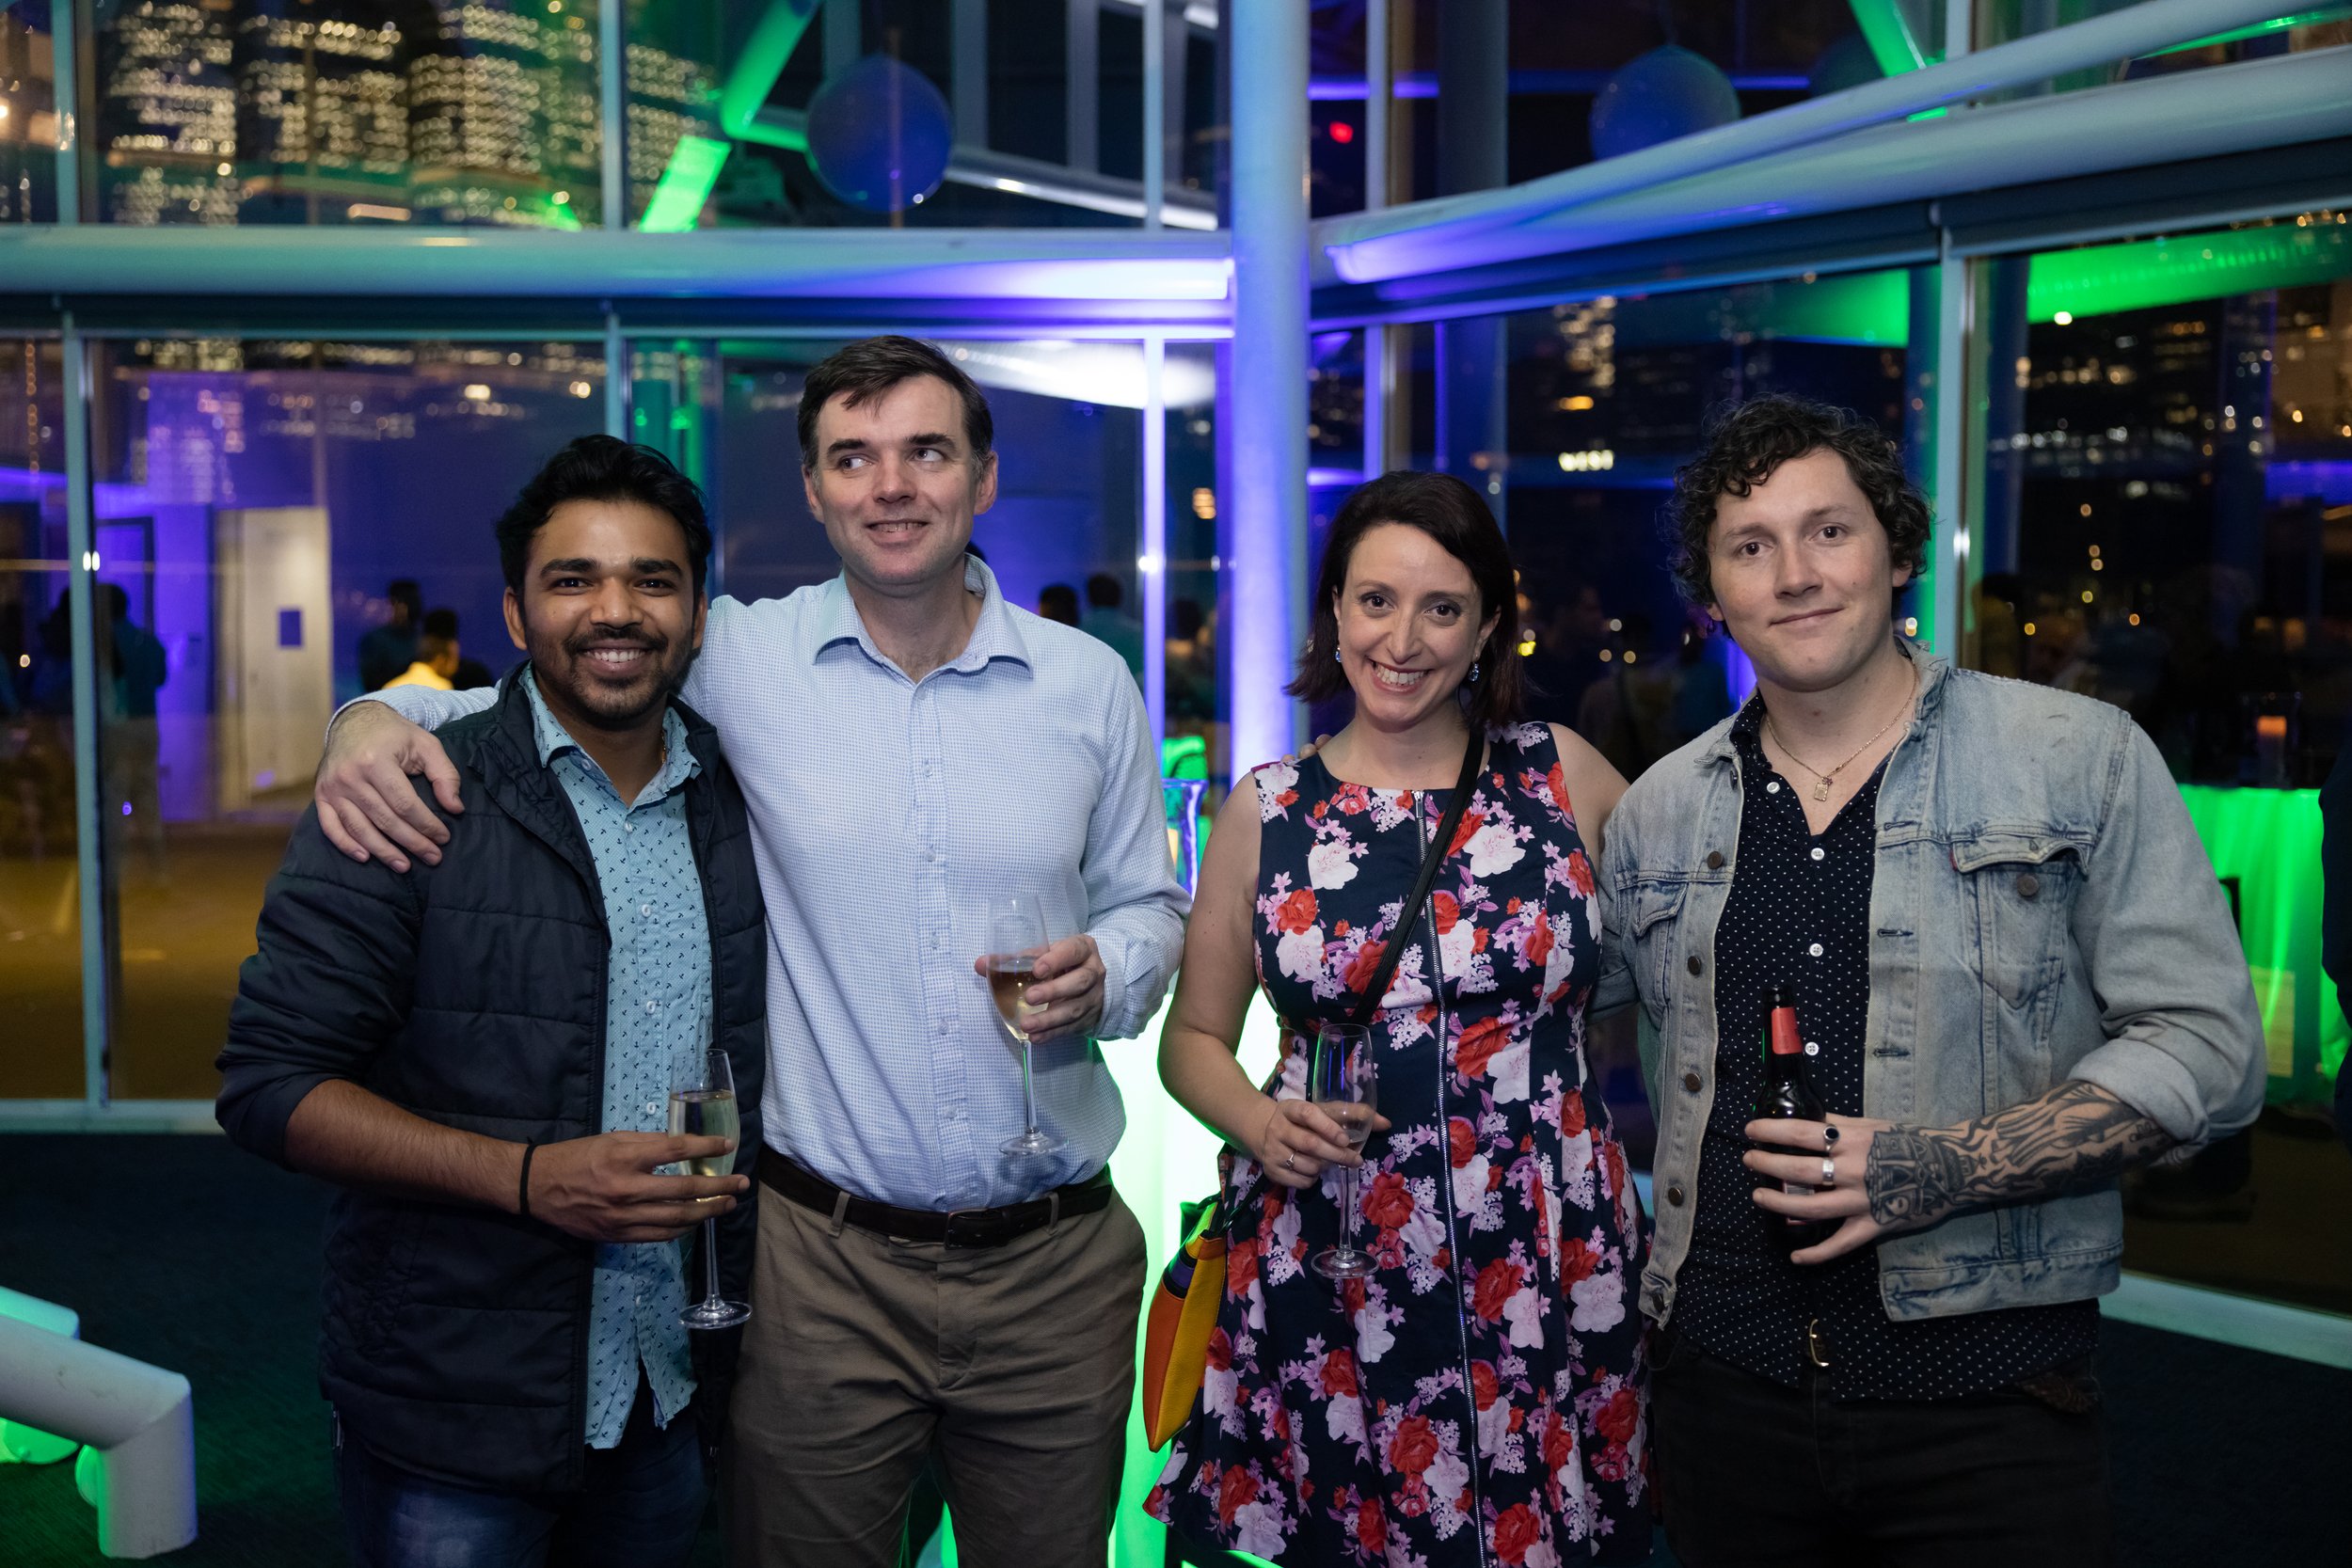 Green Energy Trading 10 years cocktail party-18.jpg